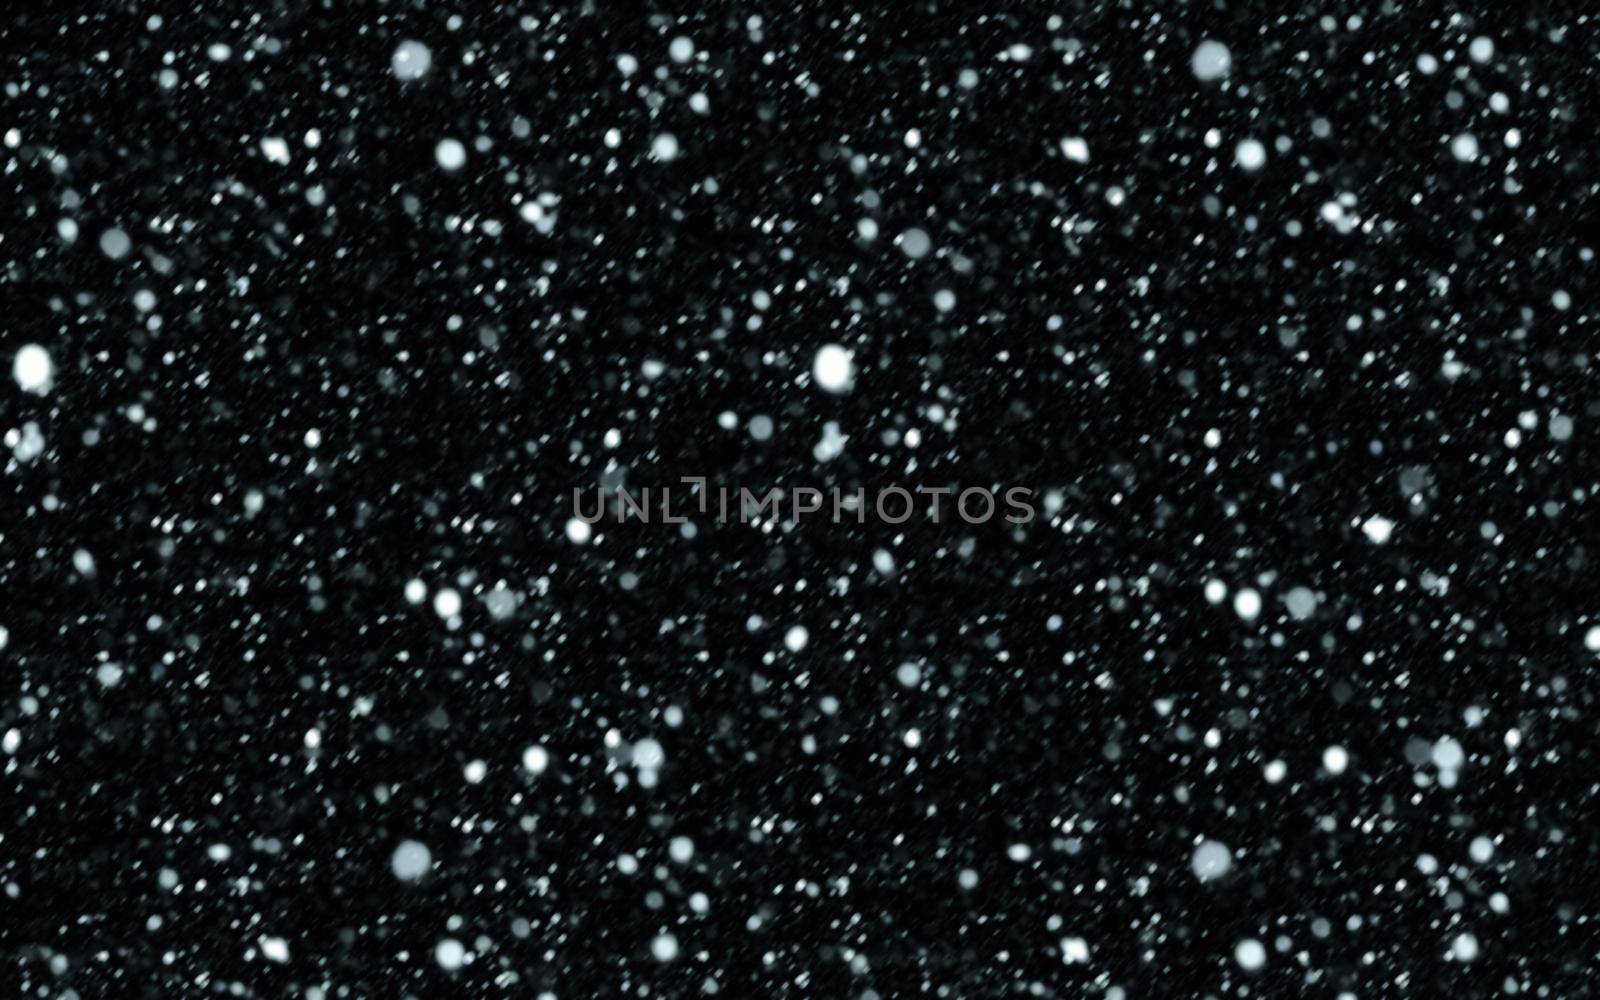 Snow on a black background by cla78